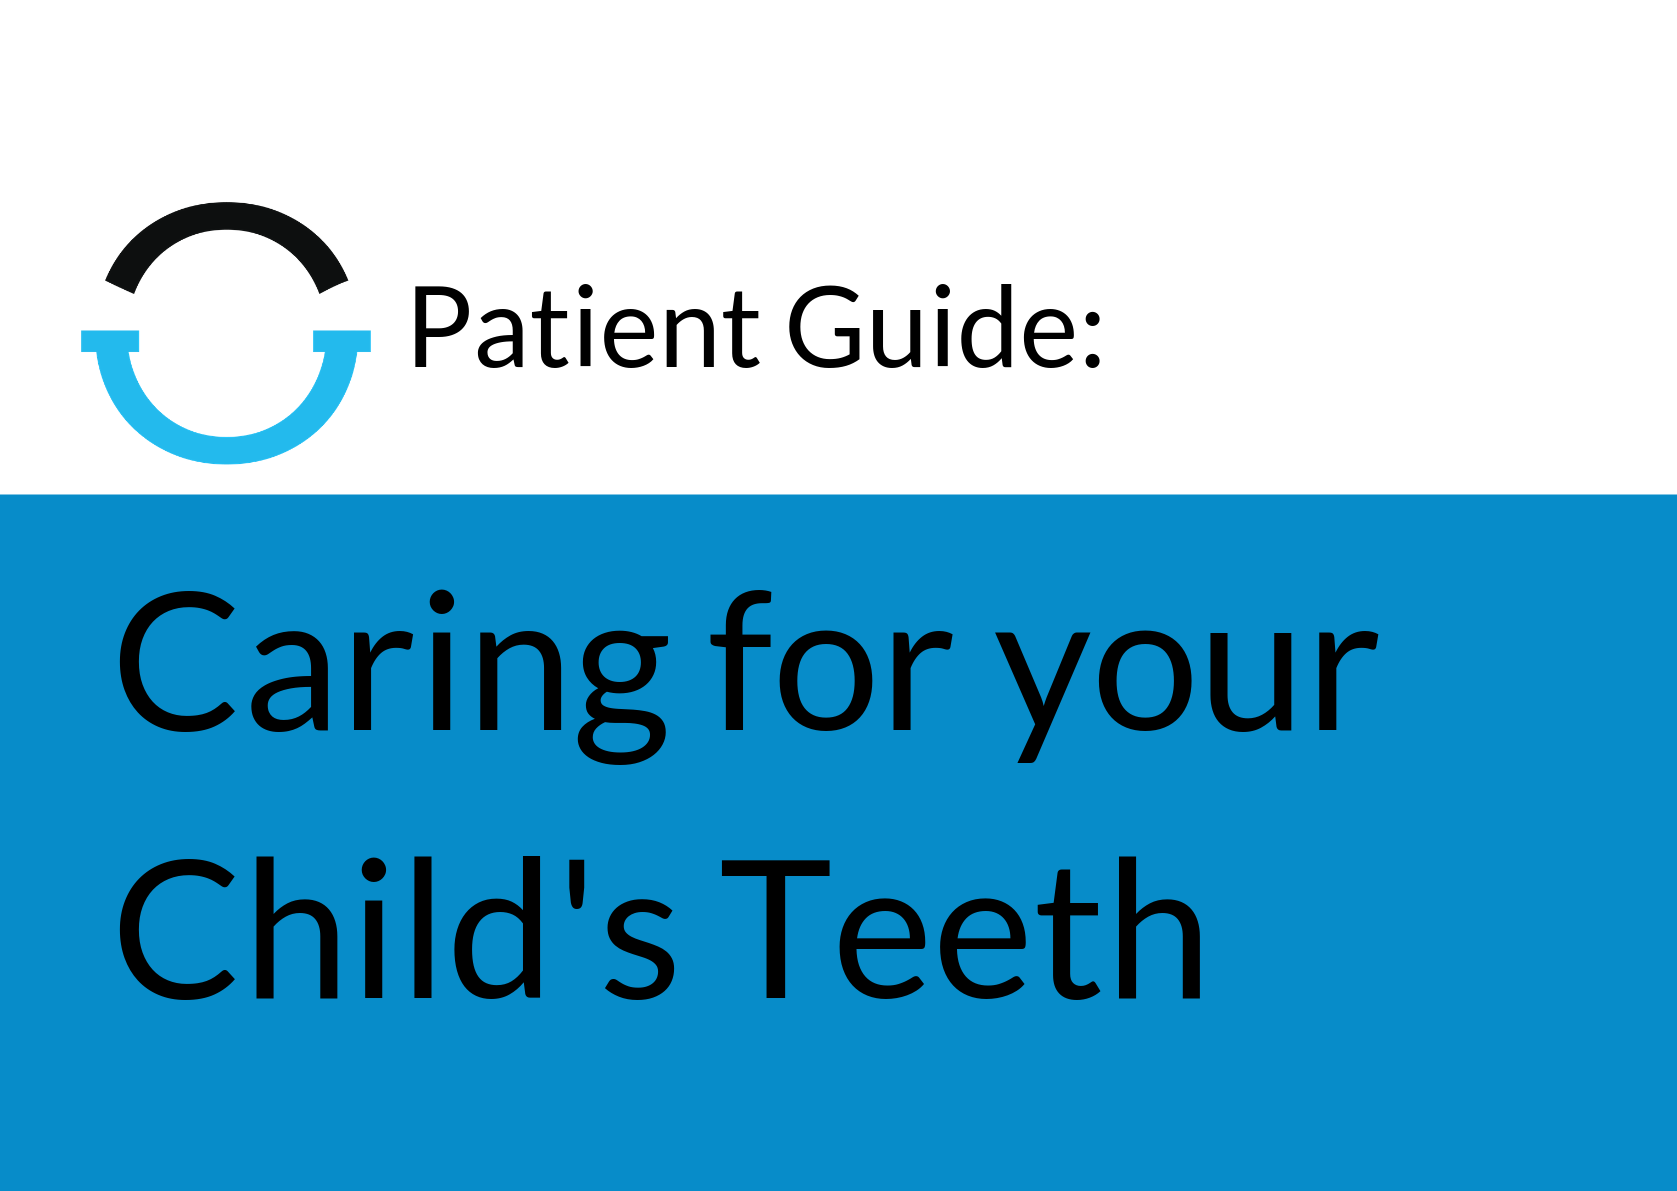 Patient Guide Header Image – Caring for your Child’s Teeth LARGE